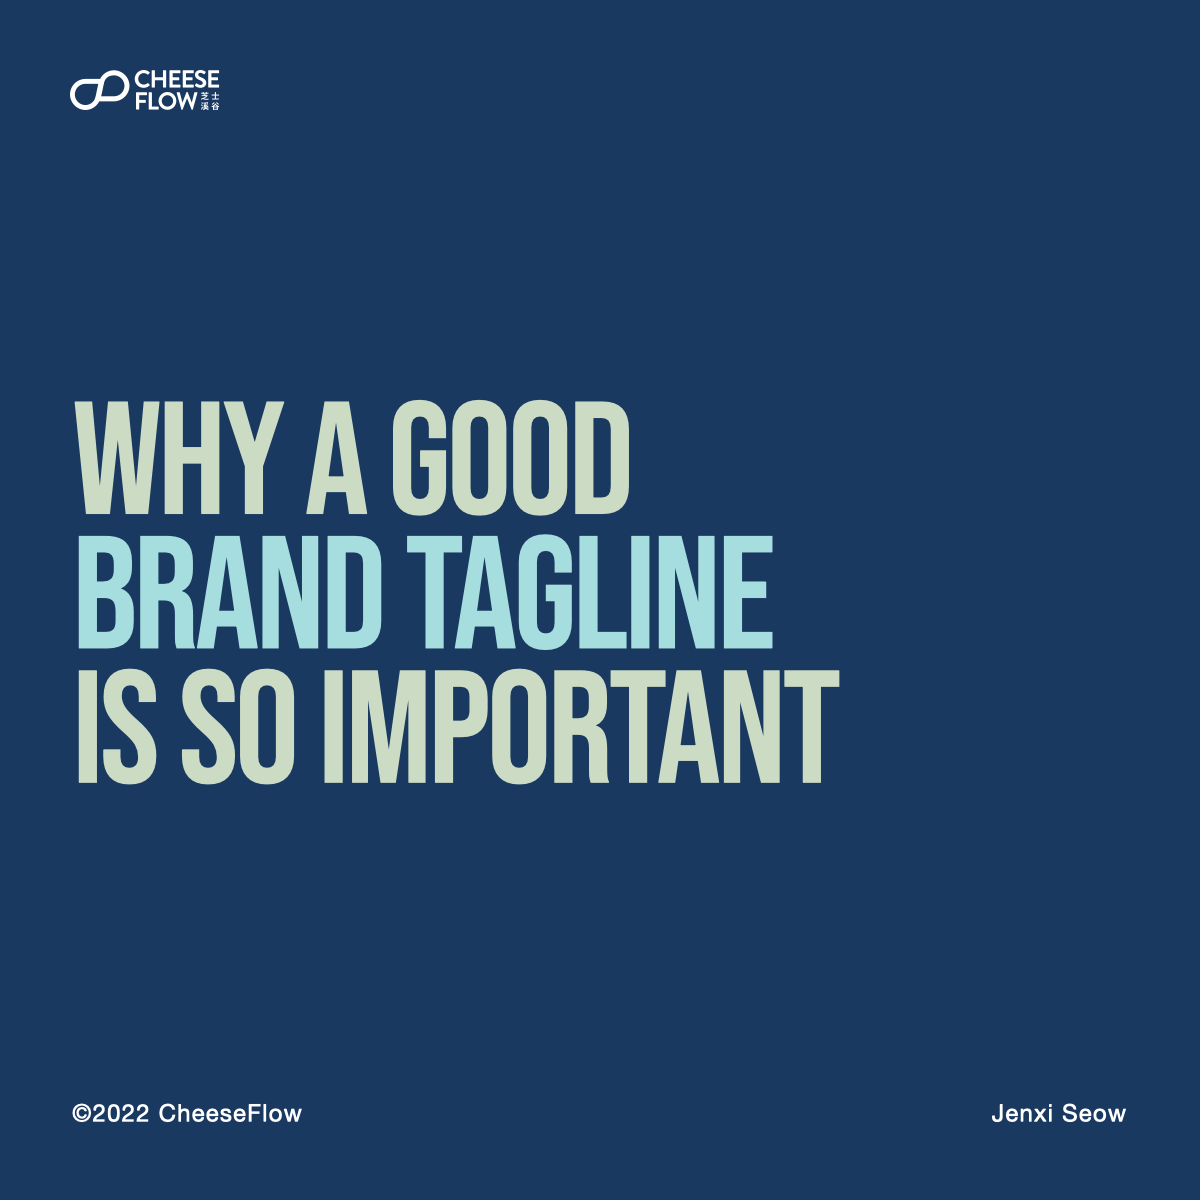 Why a good brand tagline is so important